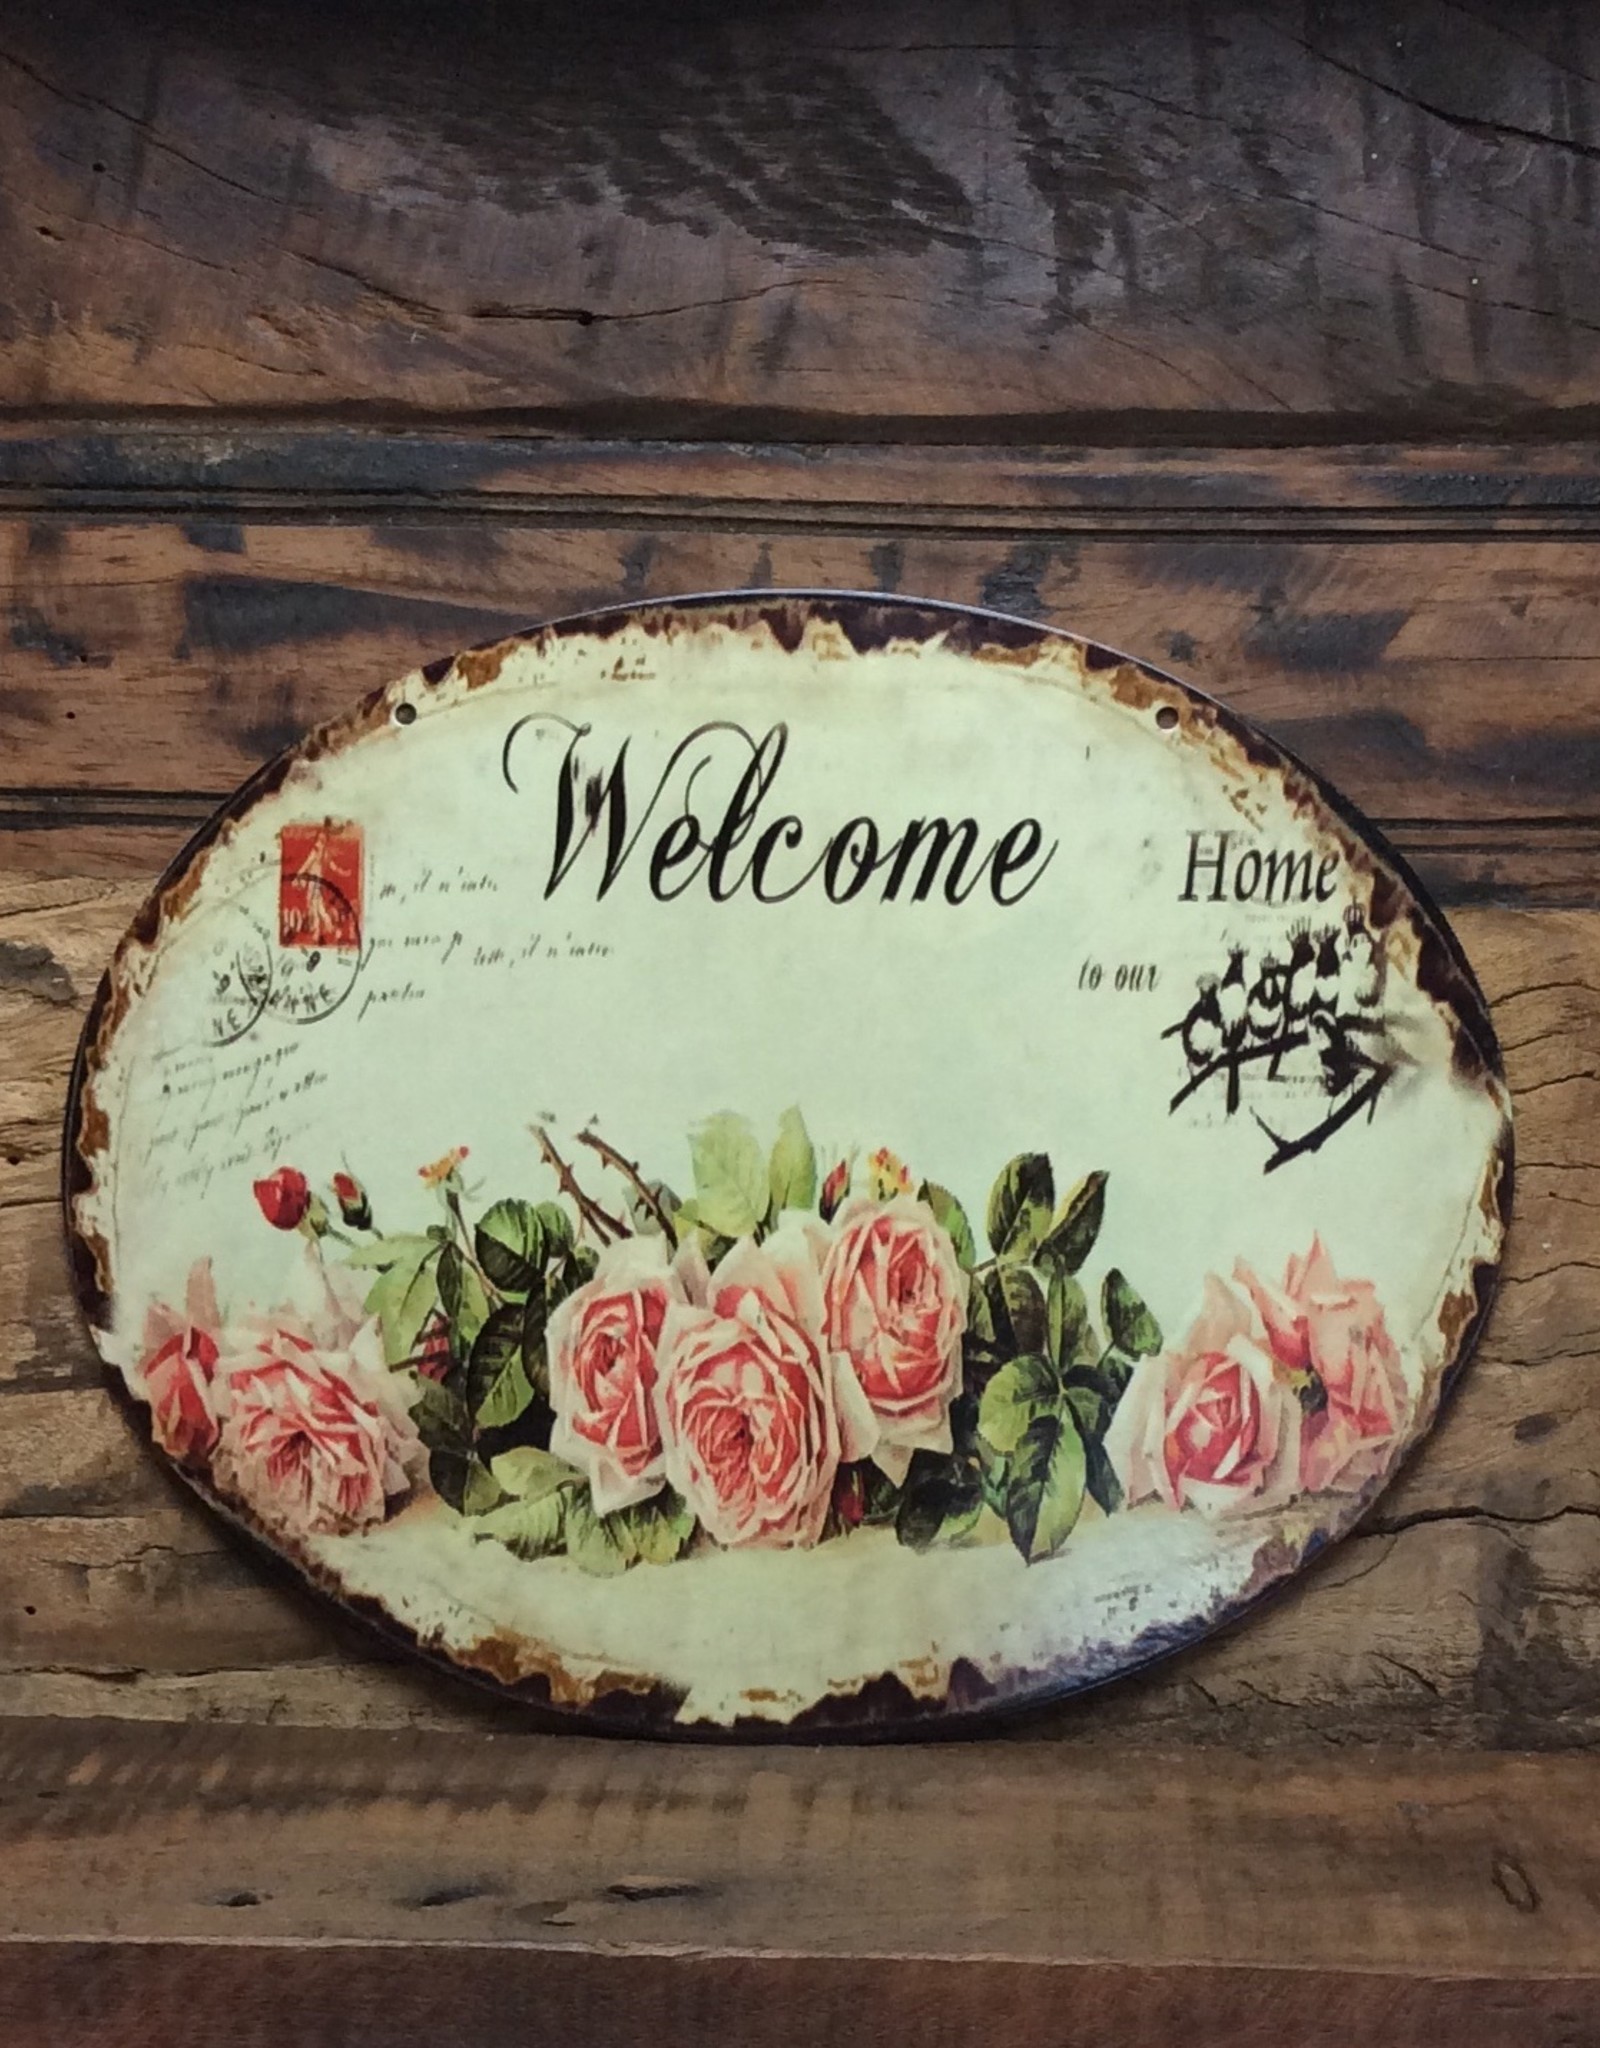 Tableau de texte "Welcome to our Home"